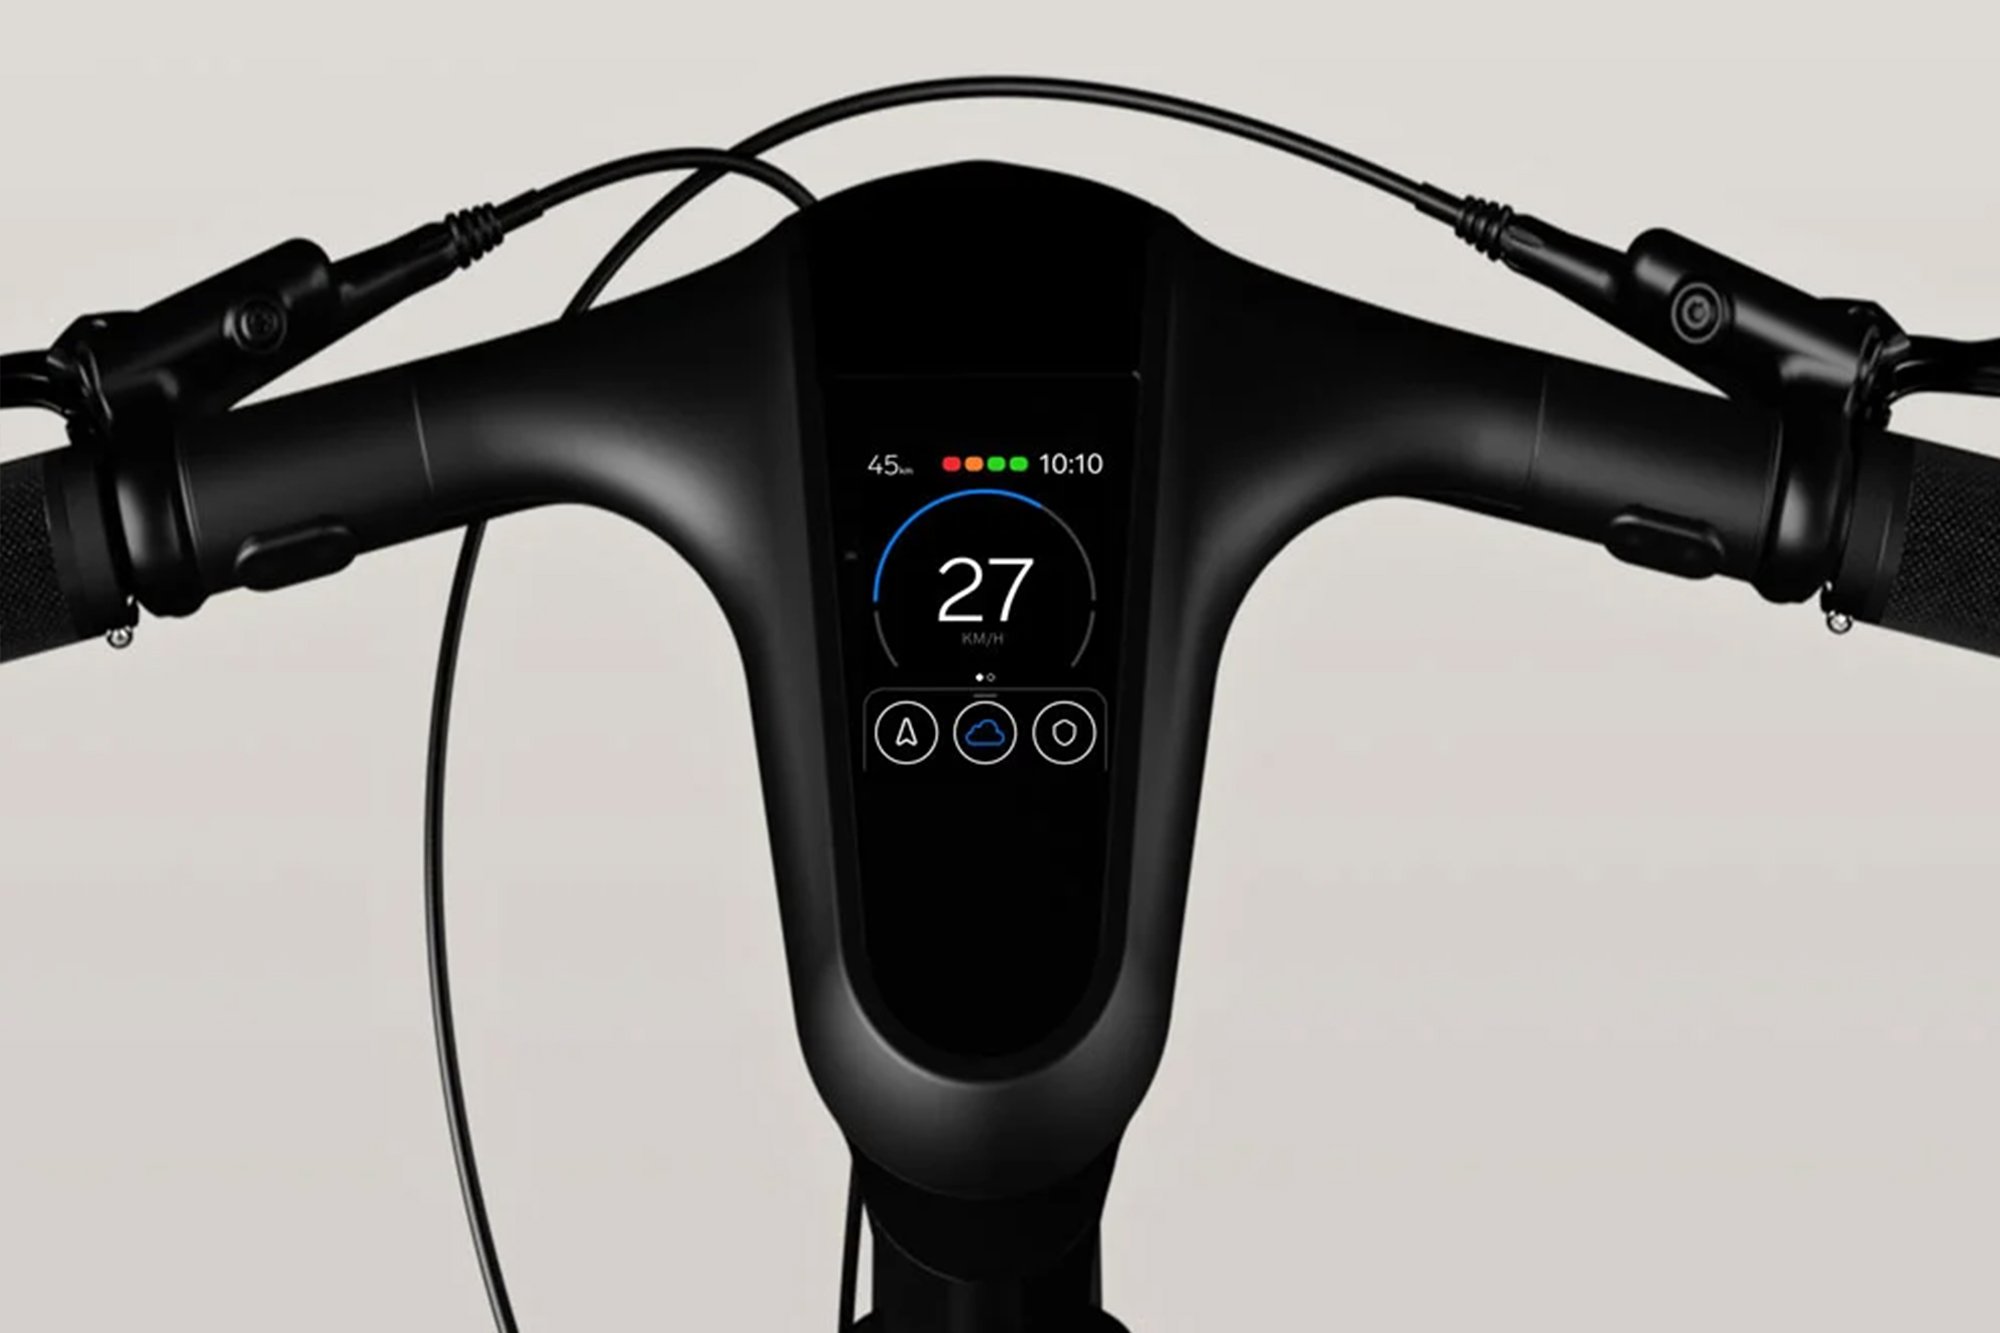 The handlebar of the MINI E-Bike 1 in collaboration with Angell Mobility